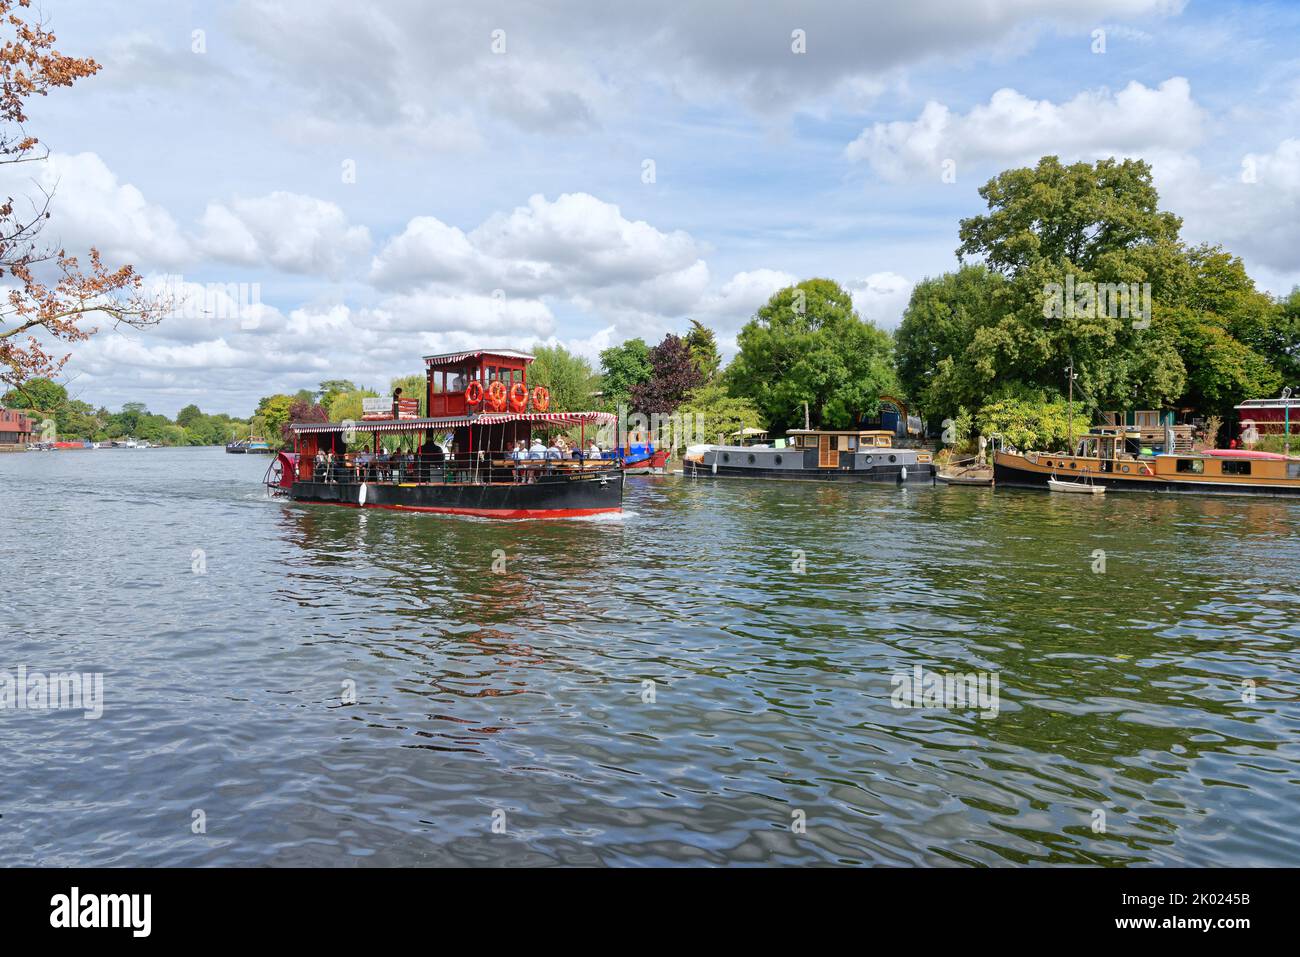 A French Brothers river trip boat cruising on The River Thames at Old Windsor on a calm summers day Berkshire England UK Stock Photo